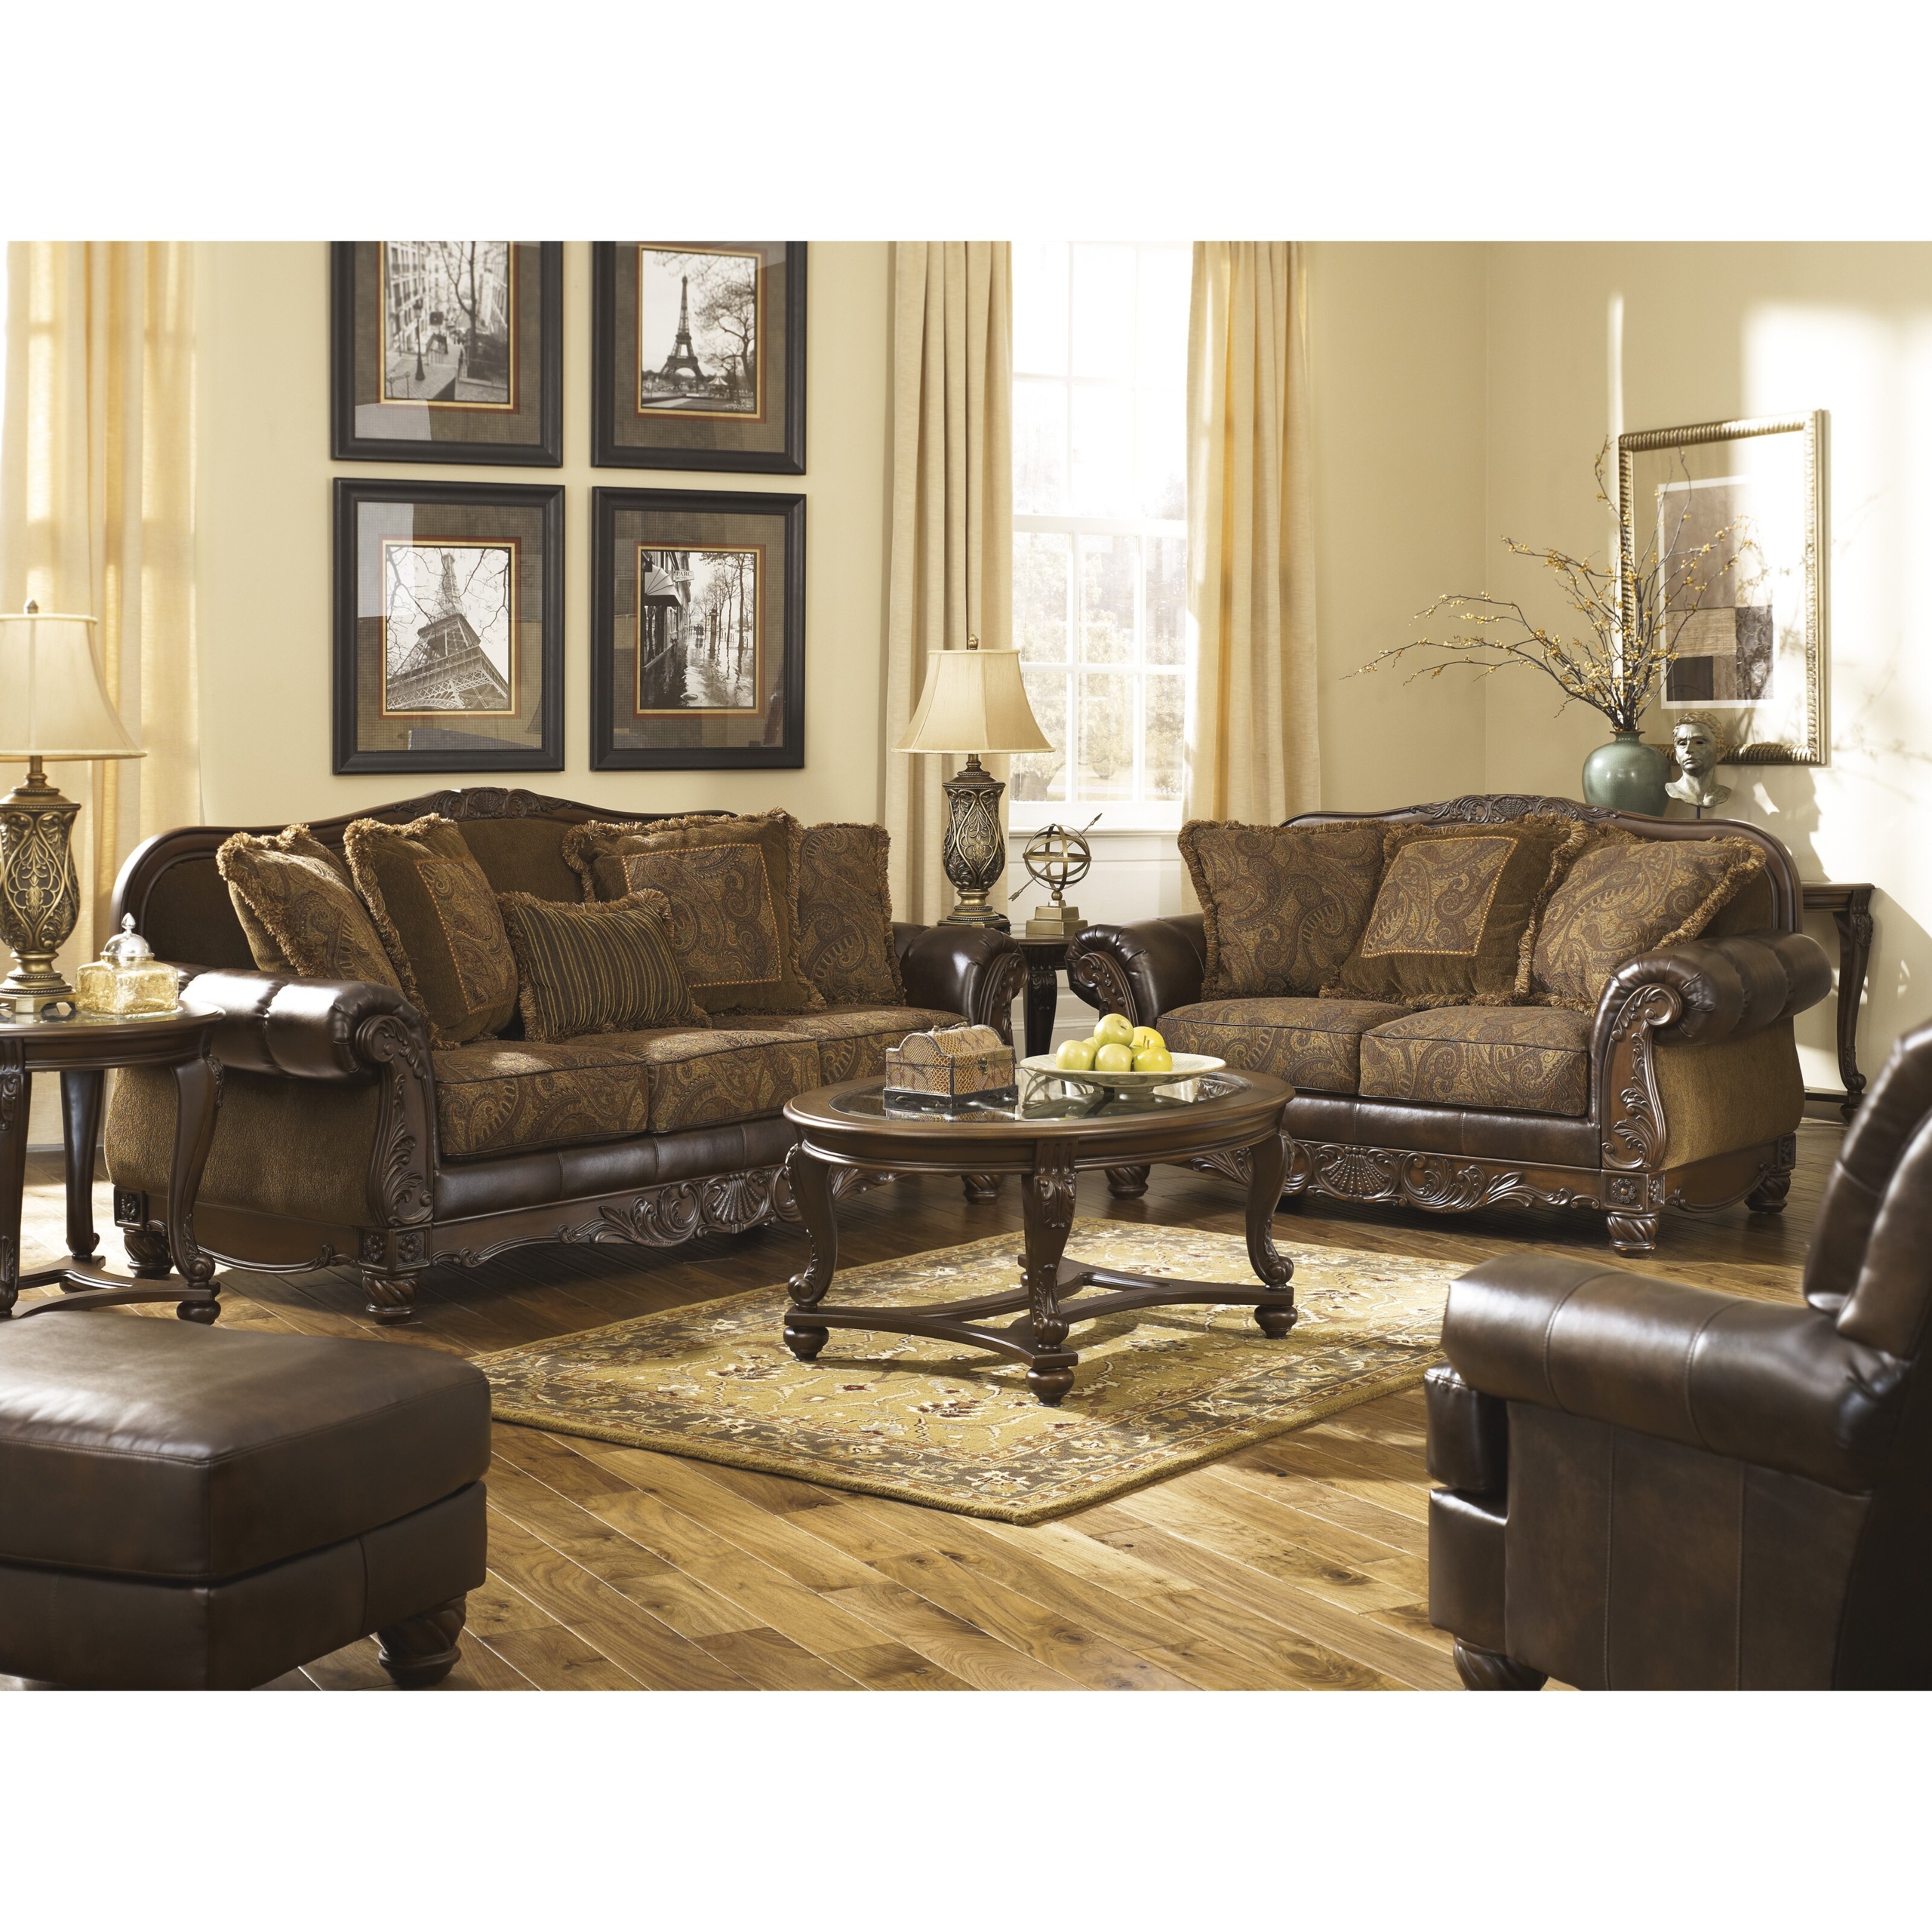 Newbern Living Room Collection